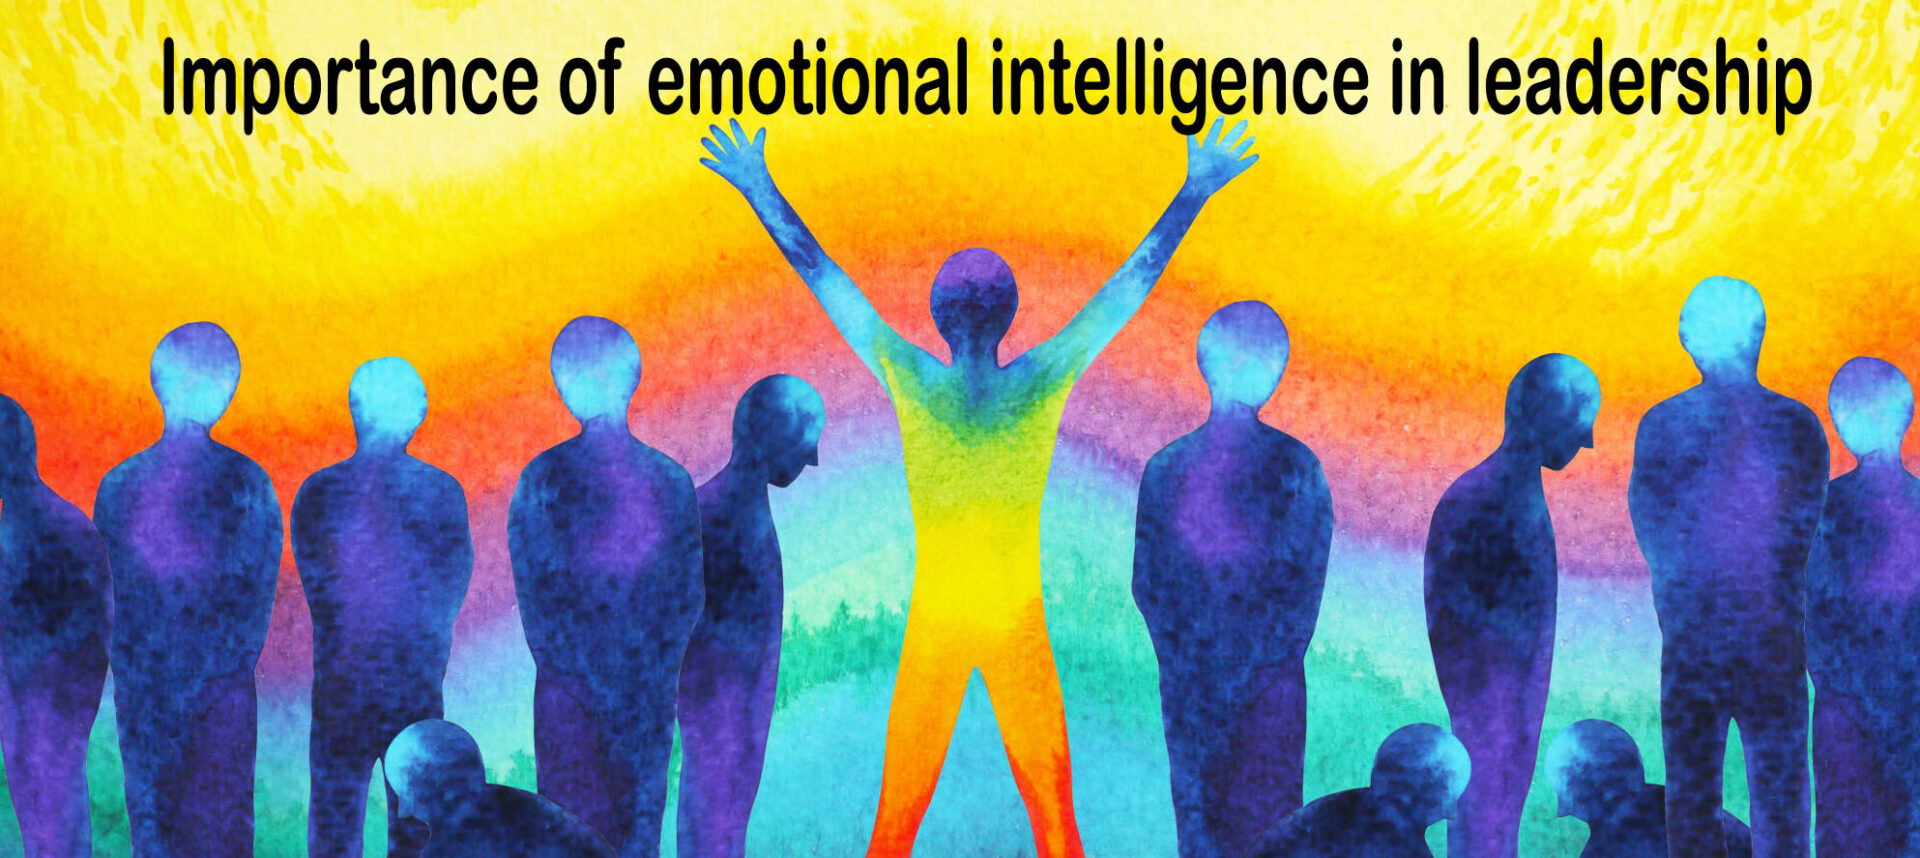 research on emotional intelligence and leadership